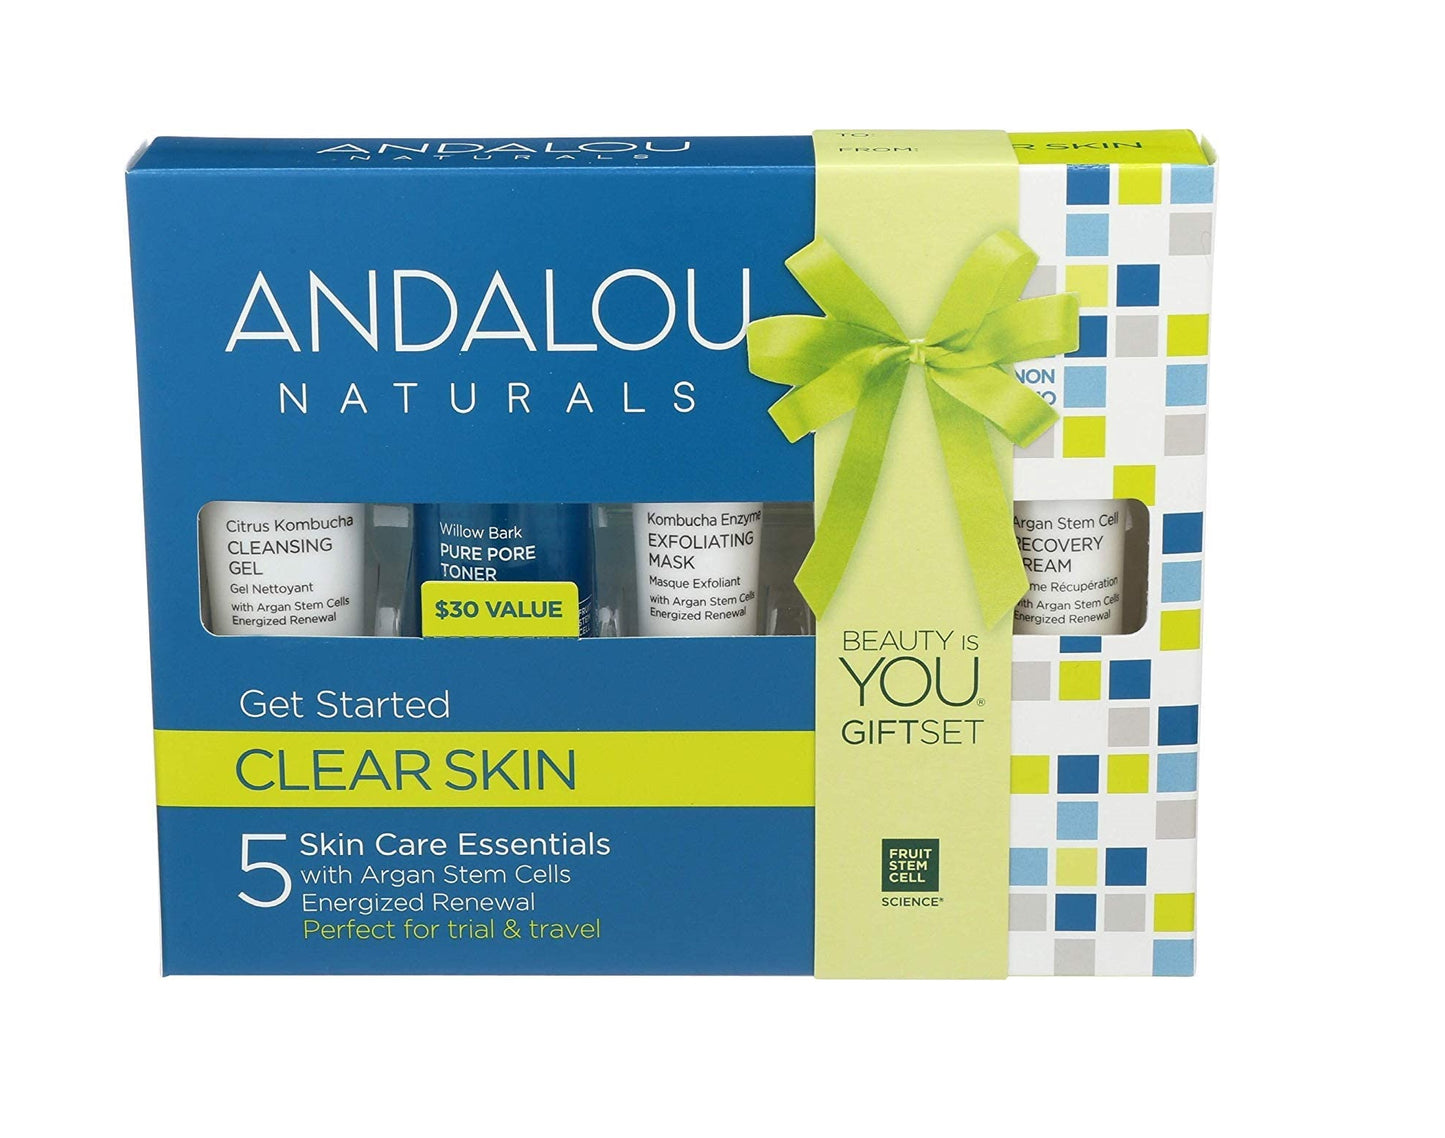 Andalou Naturals Clear Skin Get Started Kit